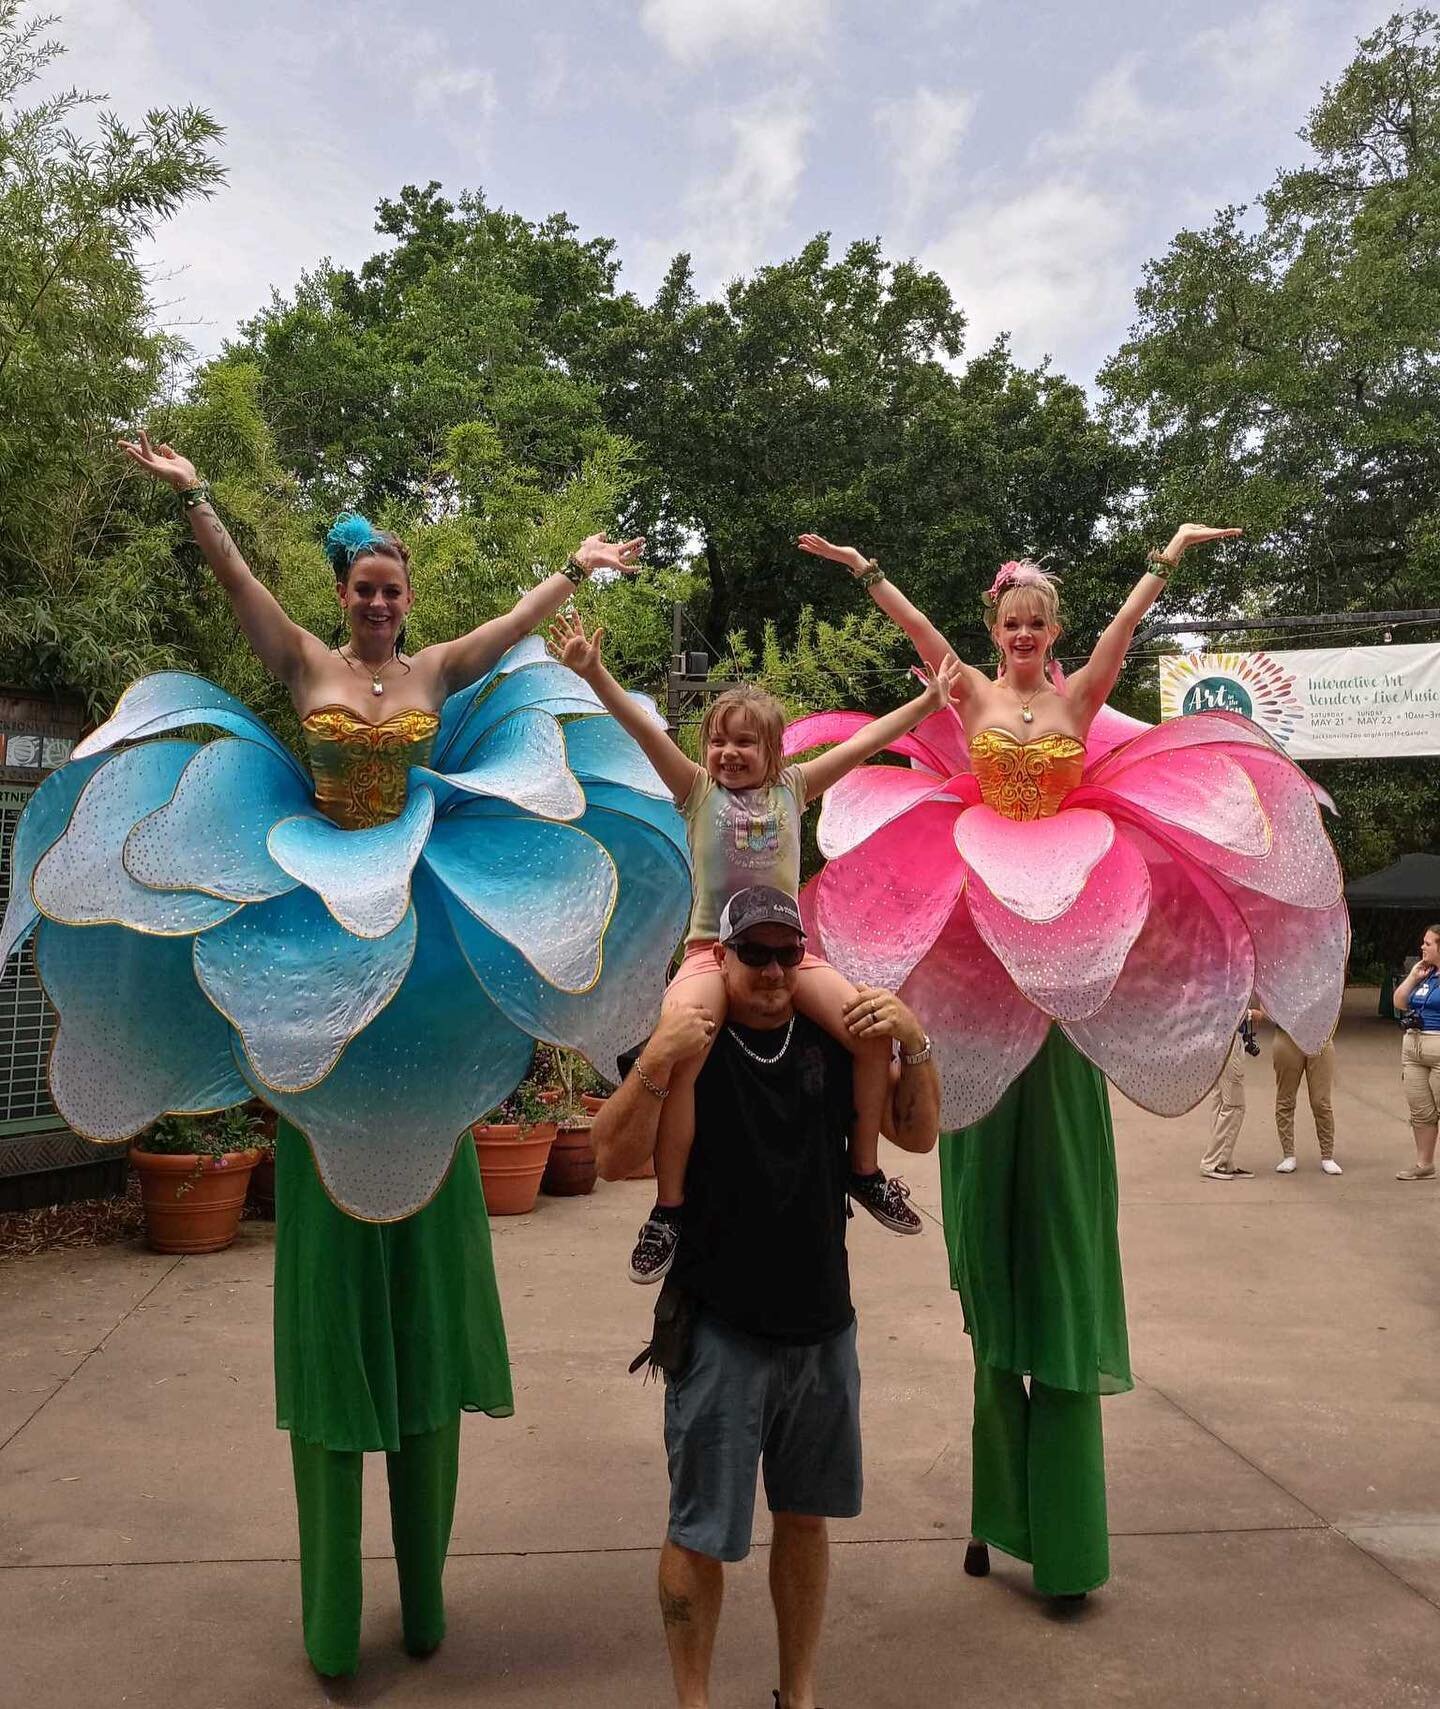 Even more lol Stilt walking flowers!!! Some pictures from our recent Art in the garden zoo festival #stiltwalkers #jacksonvillezoo #artinthegarden @jacksonvillezoo #stilts #circus #circuseverydamnday 
Thank you once again for having @kristen_sparrow_